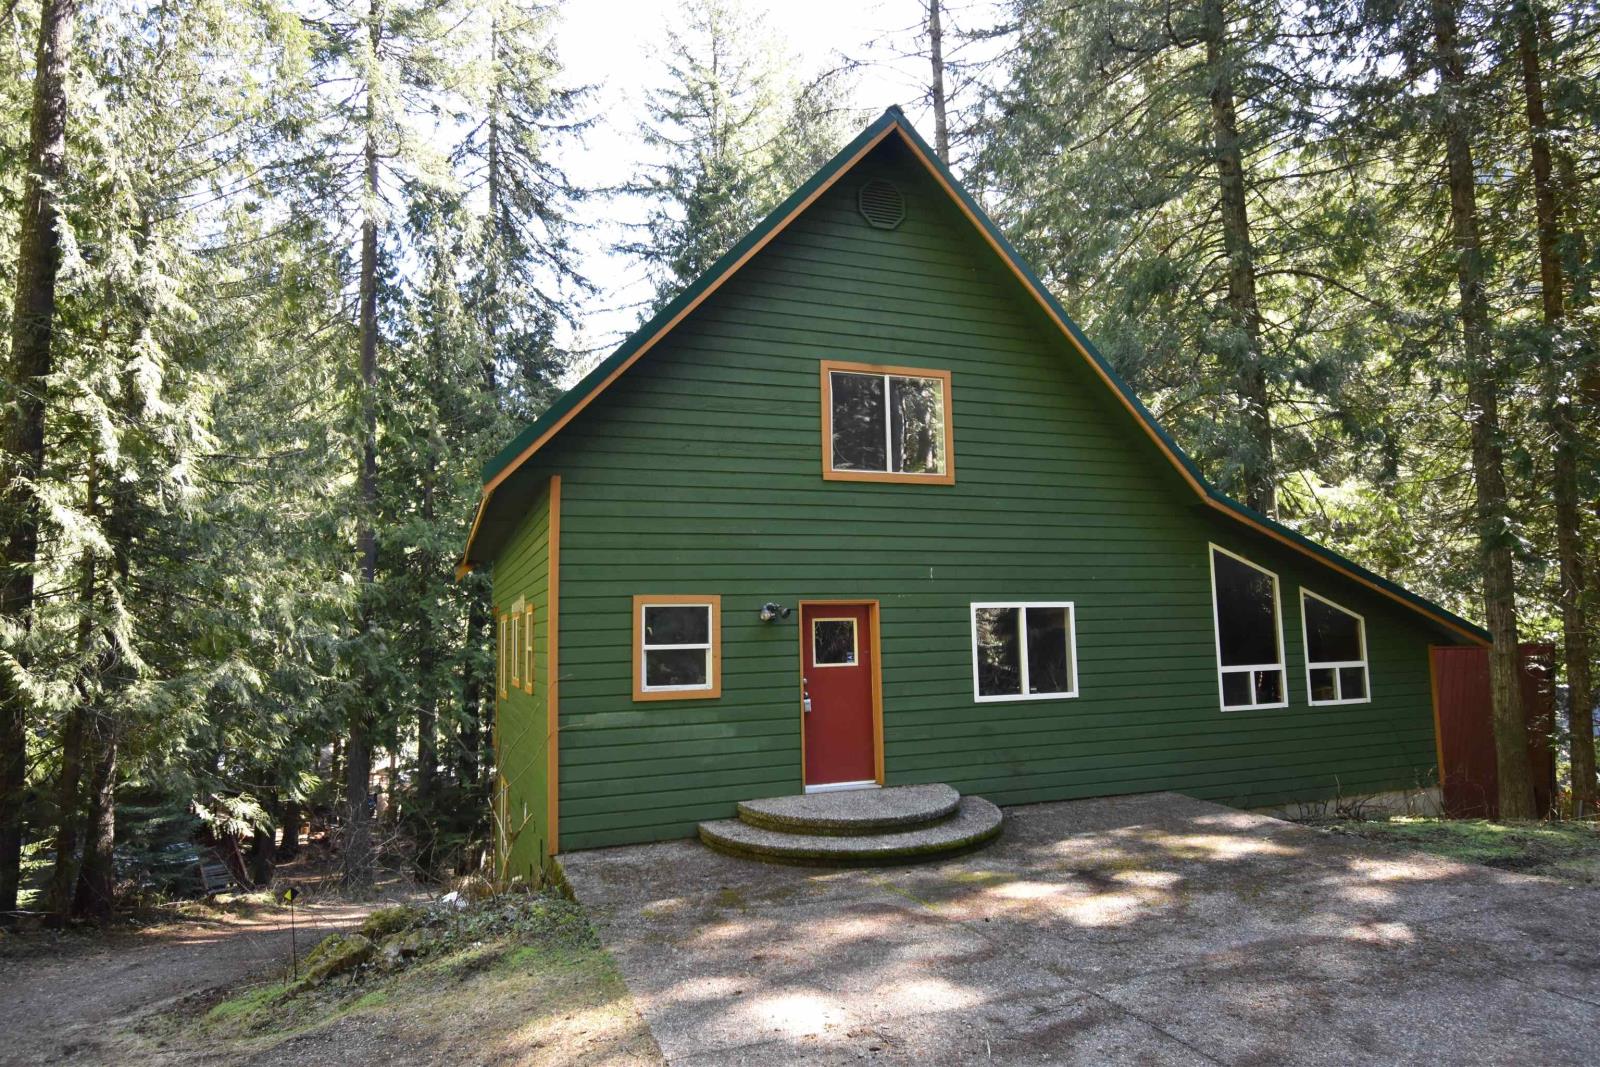 A13 14481 WHISPERING FOREST PLACE, hope, British Columbia